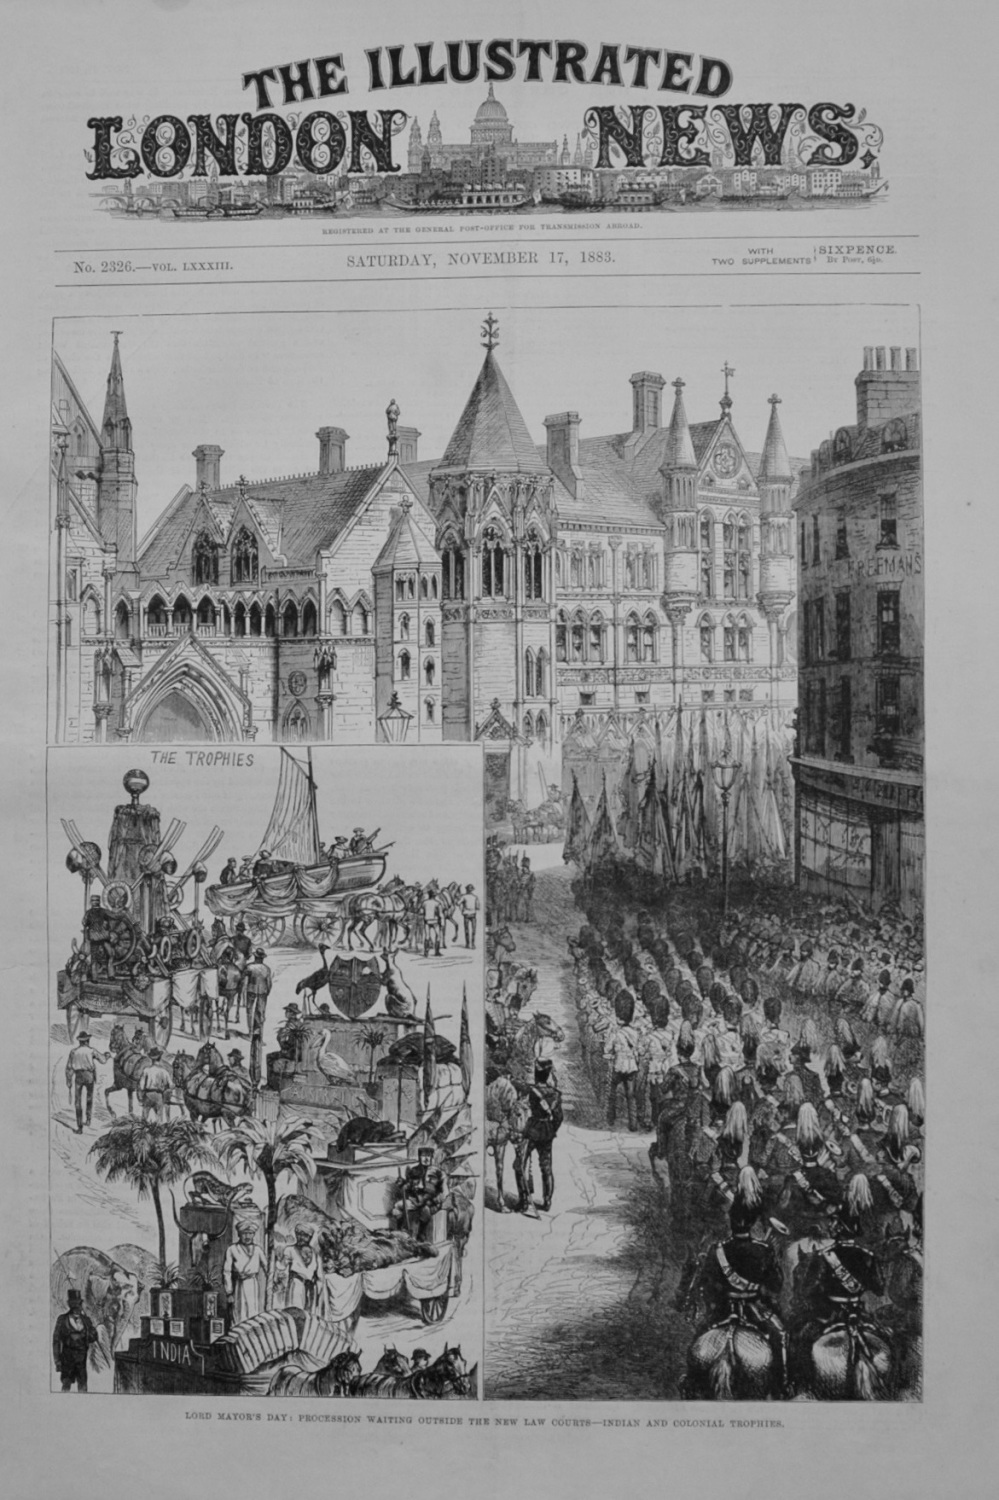 The Lord Mayor's Day - 1883